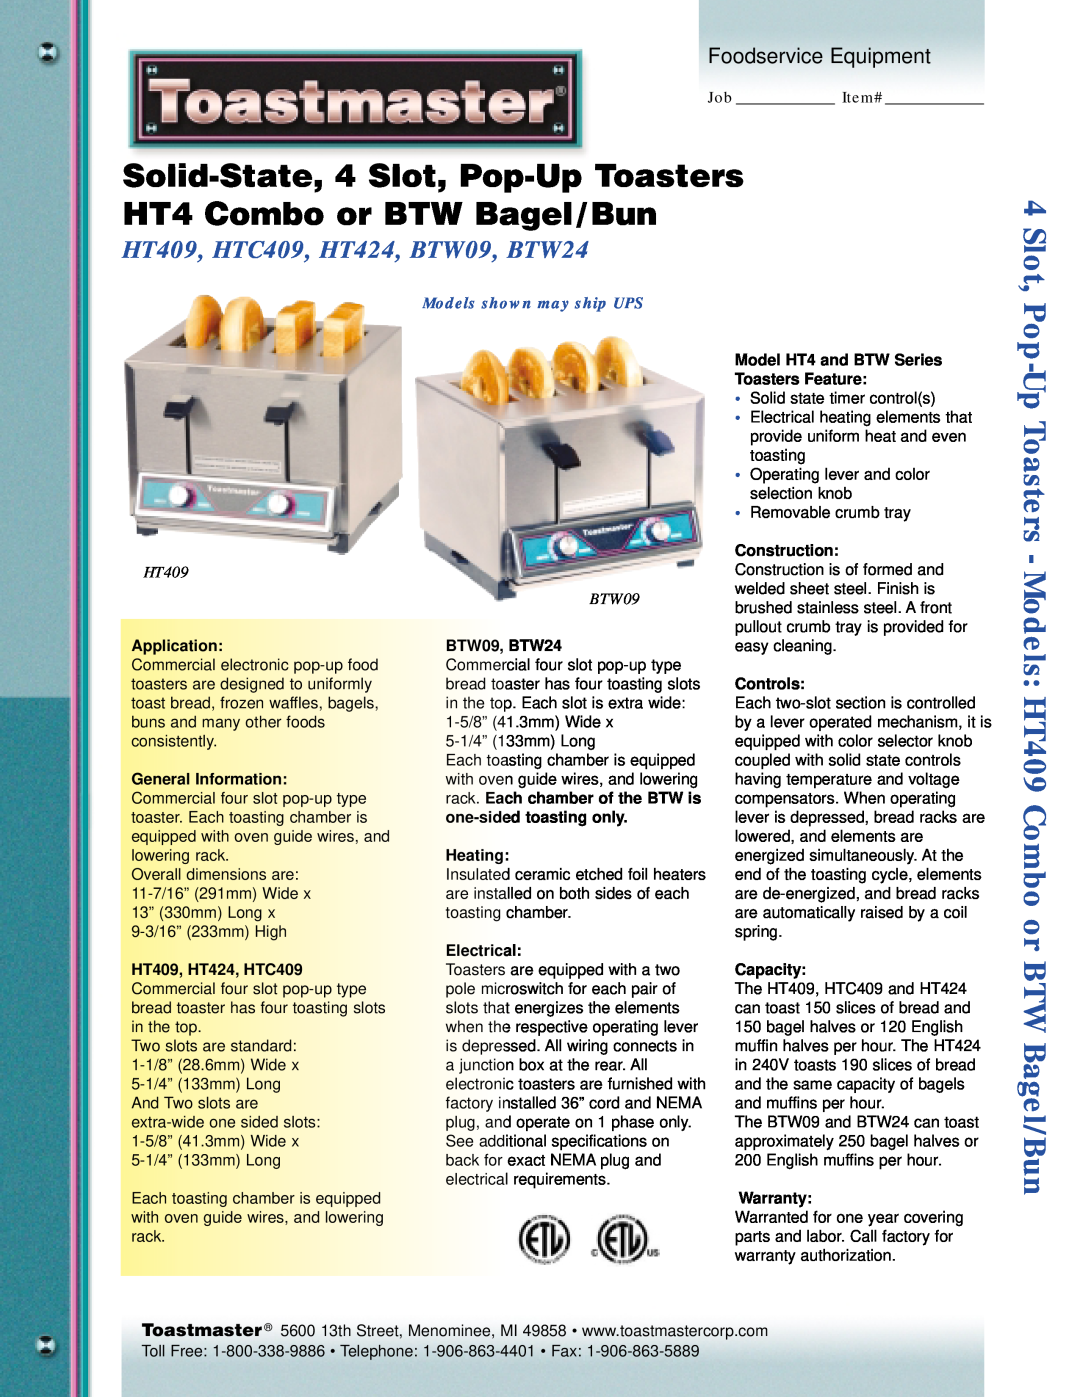 Toastmaster dimensions Slot, HT409, HTC409, HT424, BTW09, BTW24, Foodservice Equipment, Models shown may ship UPS 